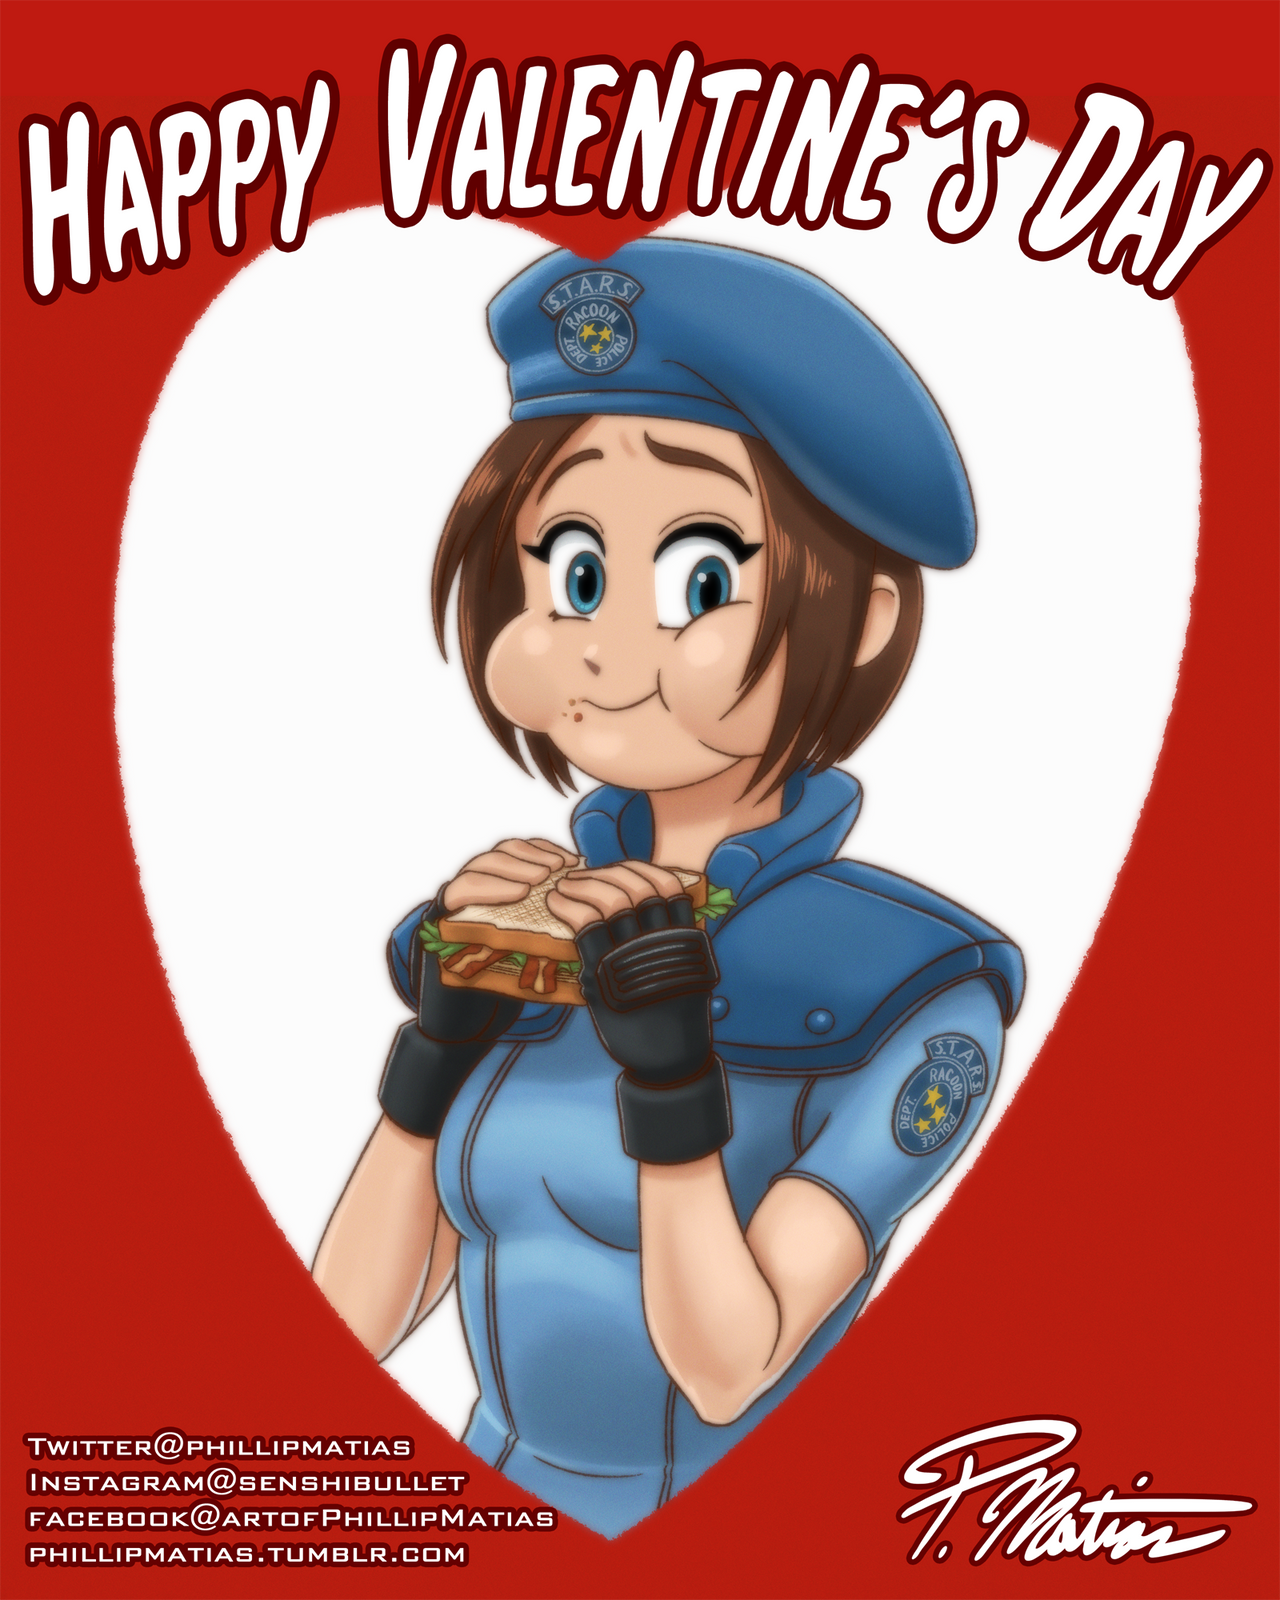 Jill Valentine-REmake PNG 1 by Isobel-Theroux on DeviantArt